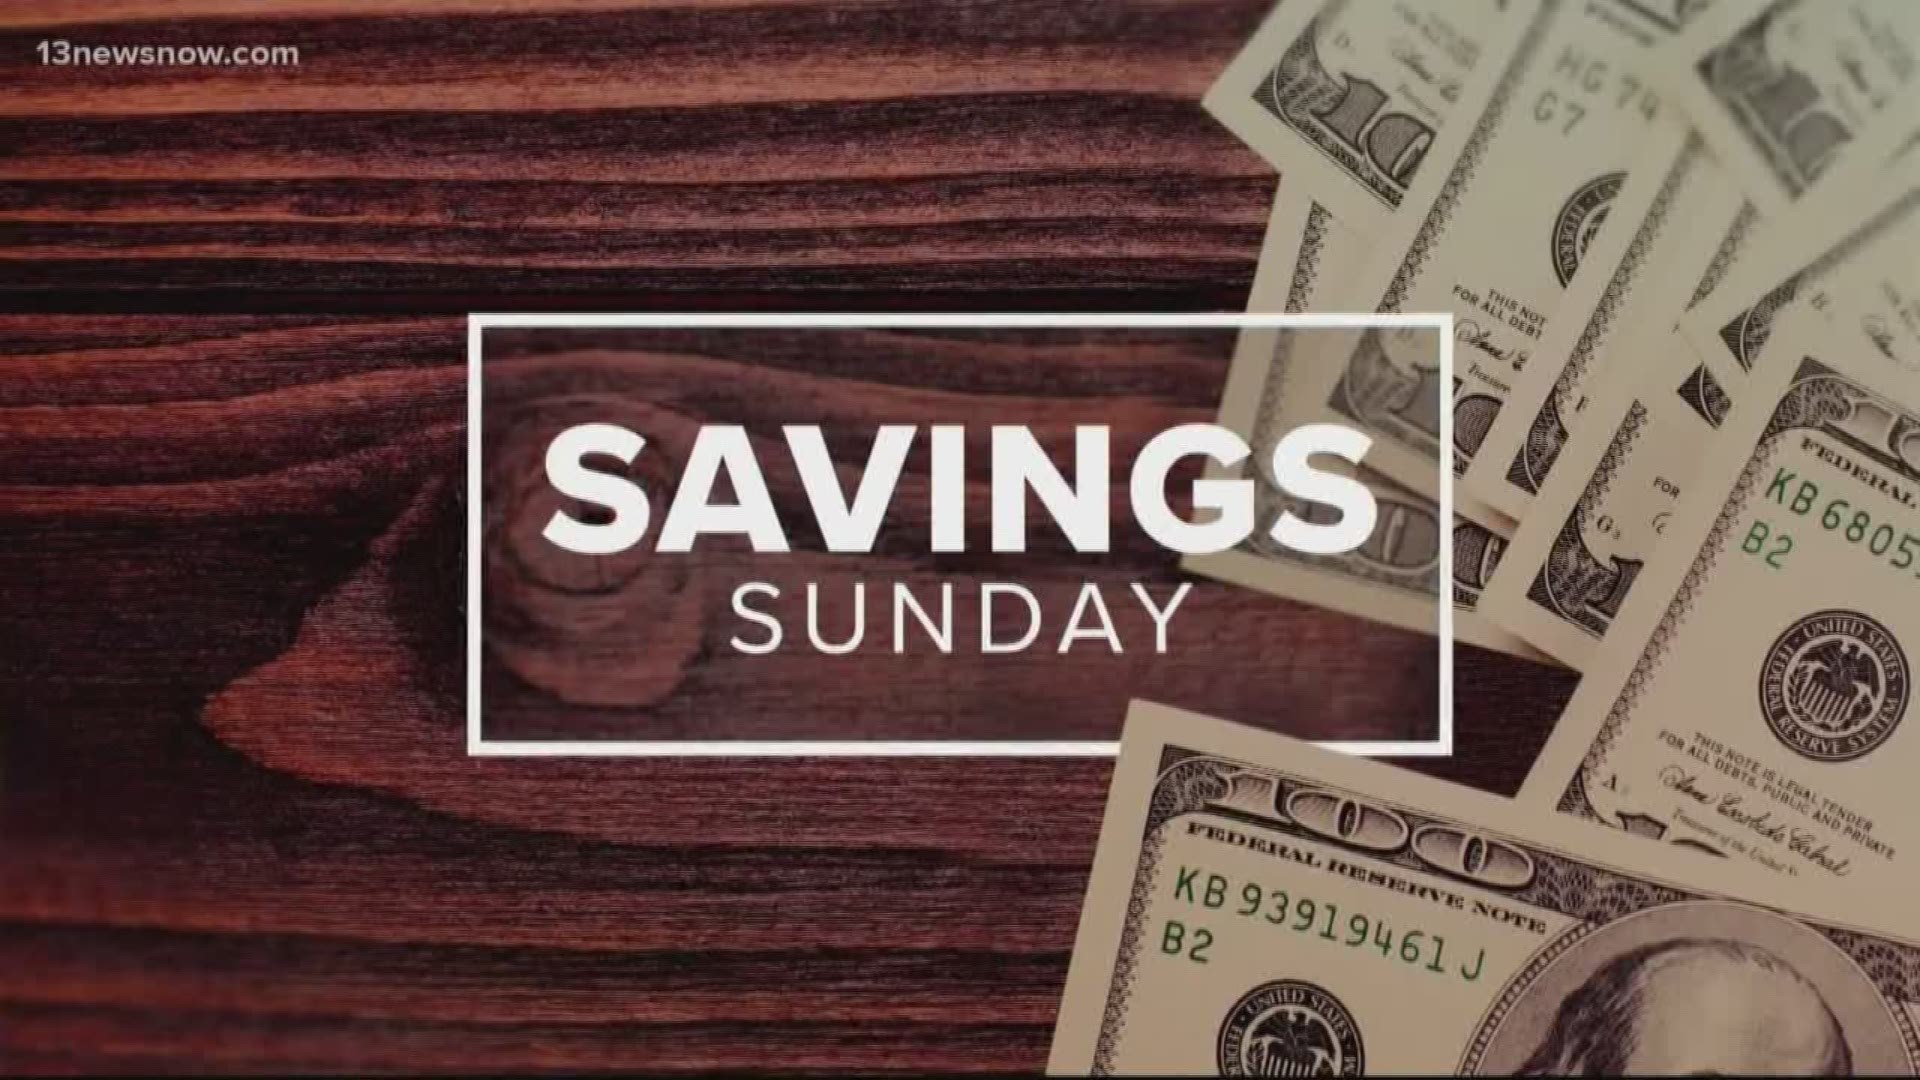 Laura Oliver from www.afrugalchick.com has your big savings for the week of Feb. 17, 2019.